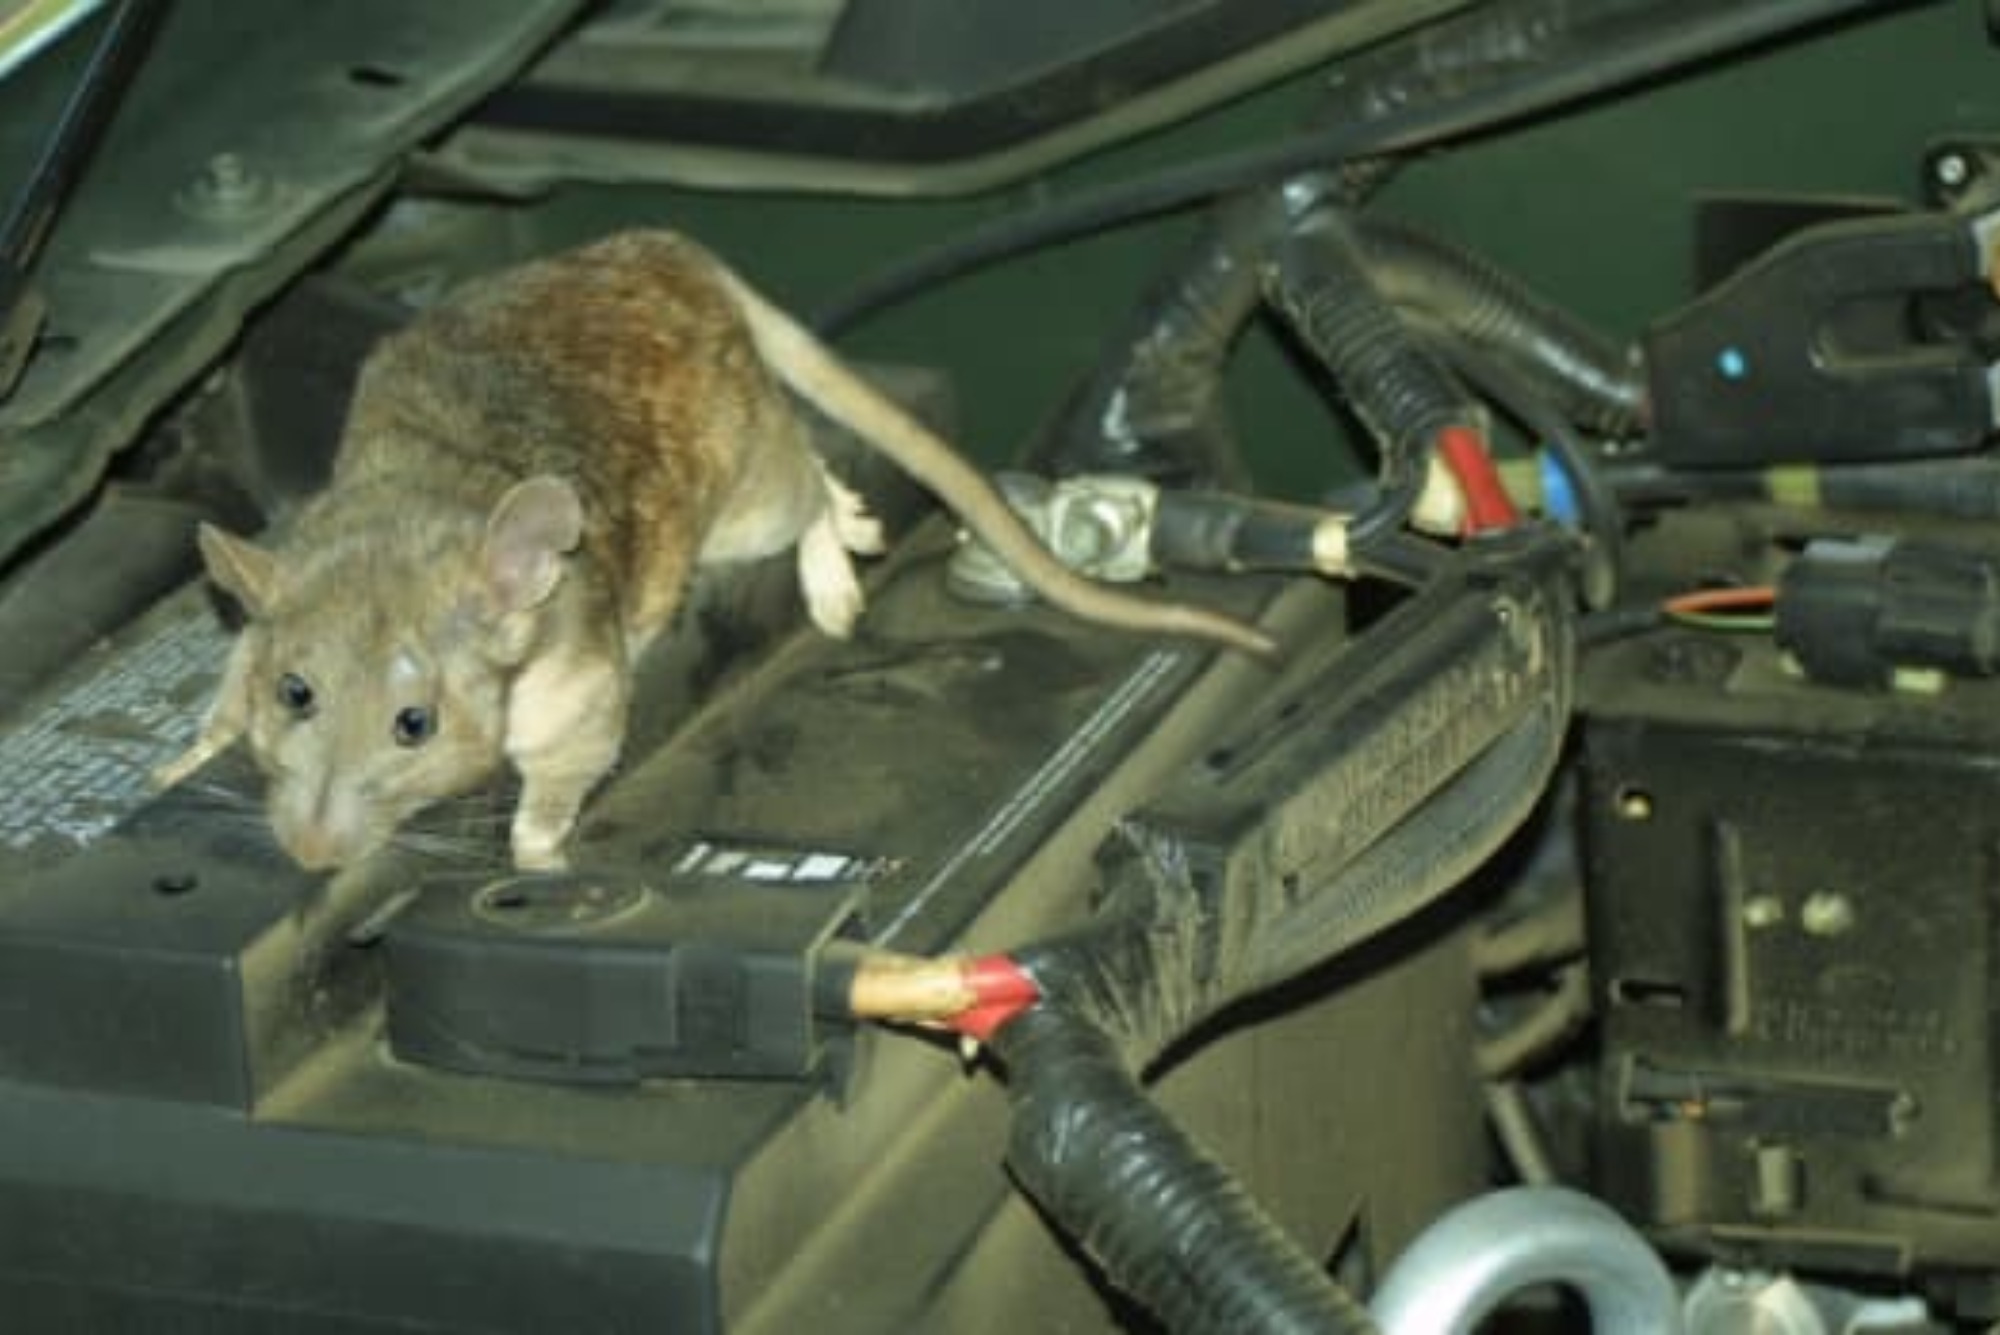 How to Avoid Rats in Car Naturally